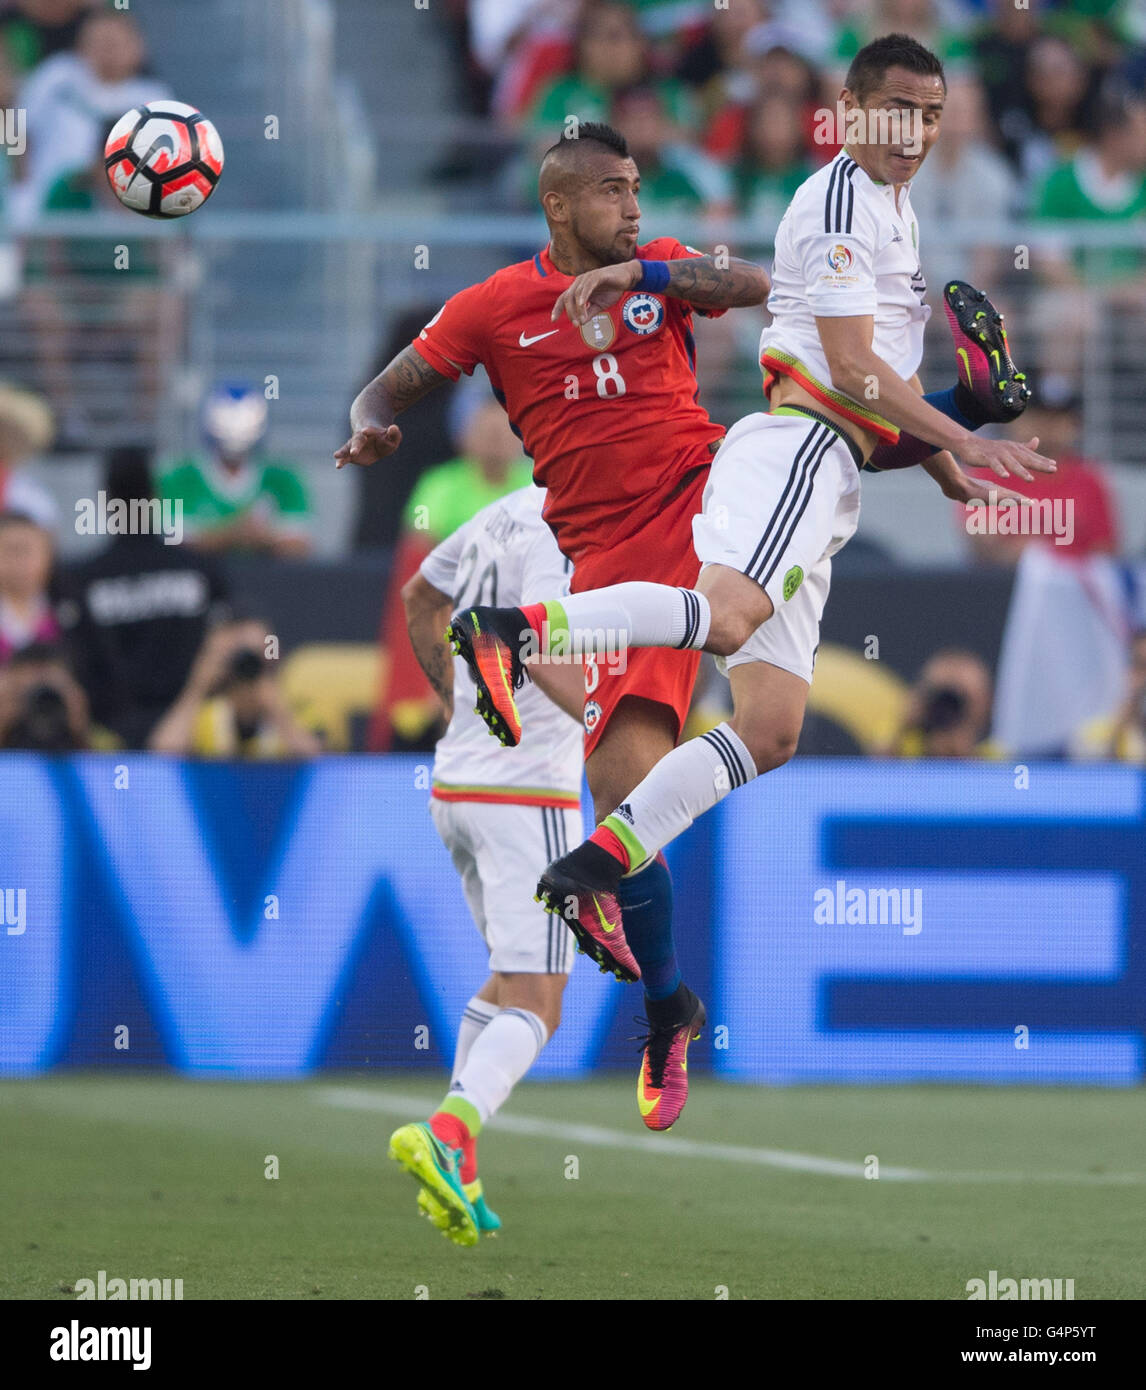 Santa Clara, USA. 18th June, 2016. Arturo Vidal (L) of Chile vies with Paul Aguilar of Mexico during their quarterfinal match of 2016 Copa America soccer tournament at the Levi's Stadium in Santa Clara, California, the United States, June 18, 2016. Chile won 7-0. Credit:  Yang Lei/Xinhua/Alamy Live News Stock Photo